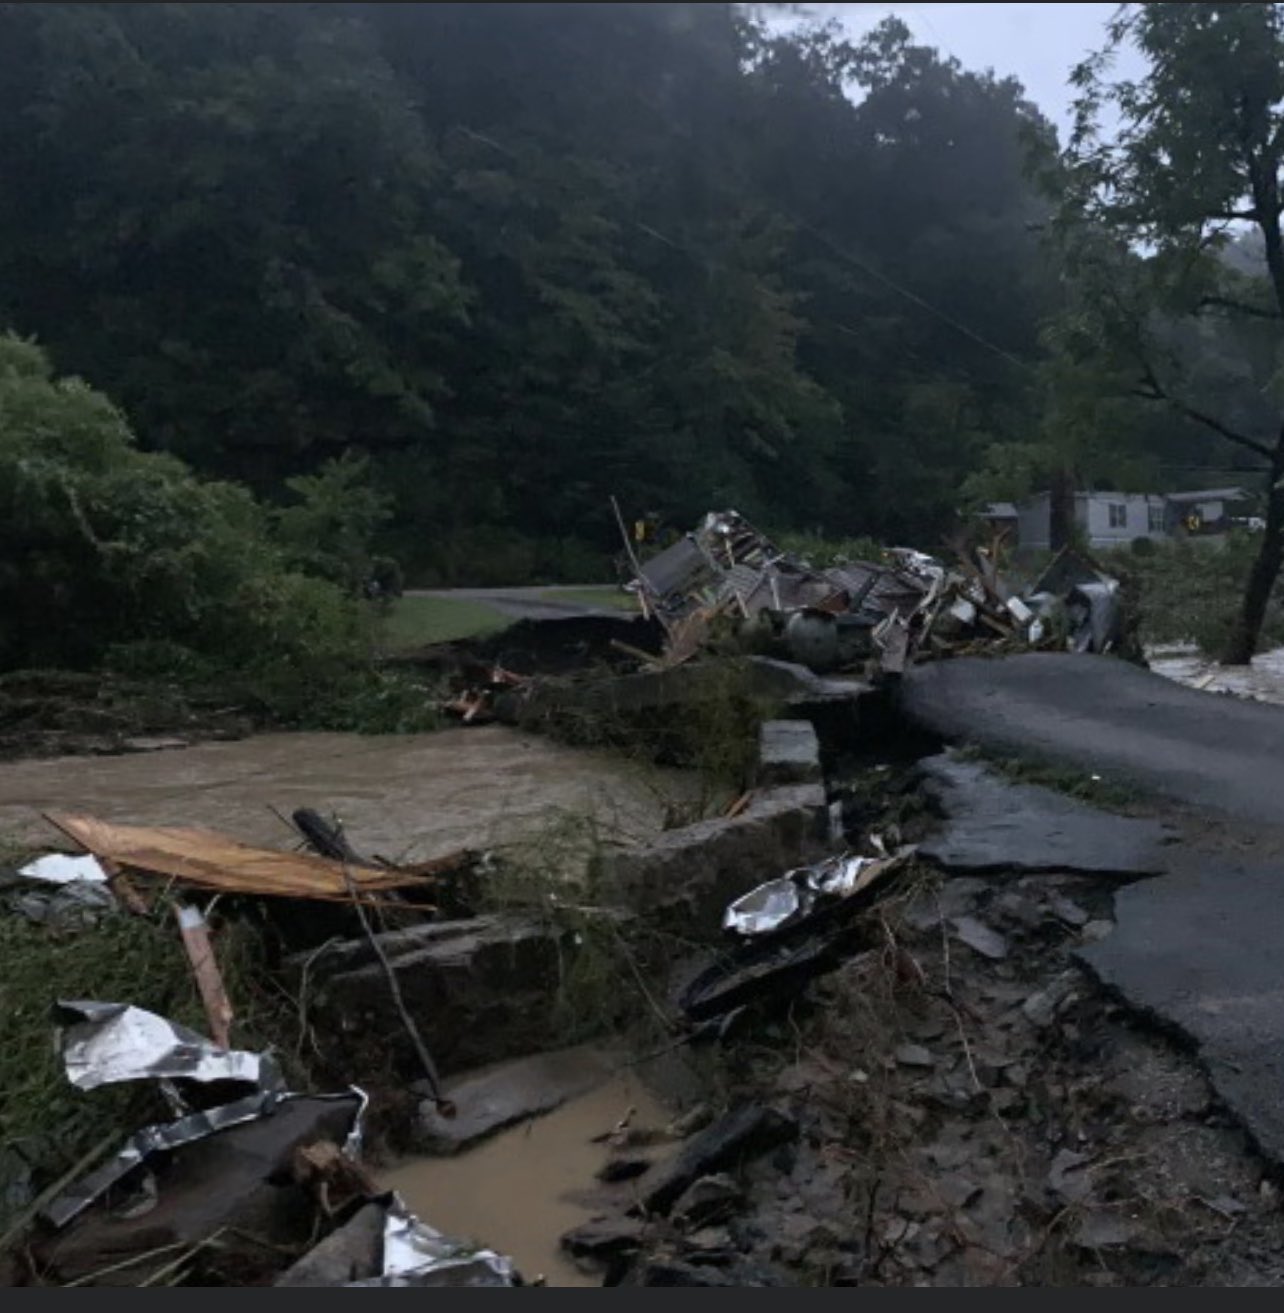 Destroyed roads and structures due to flash flooding in Chavies, KY